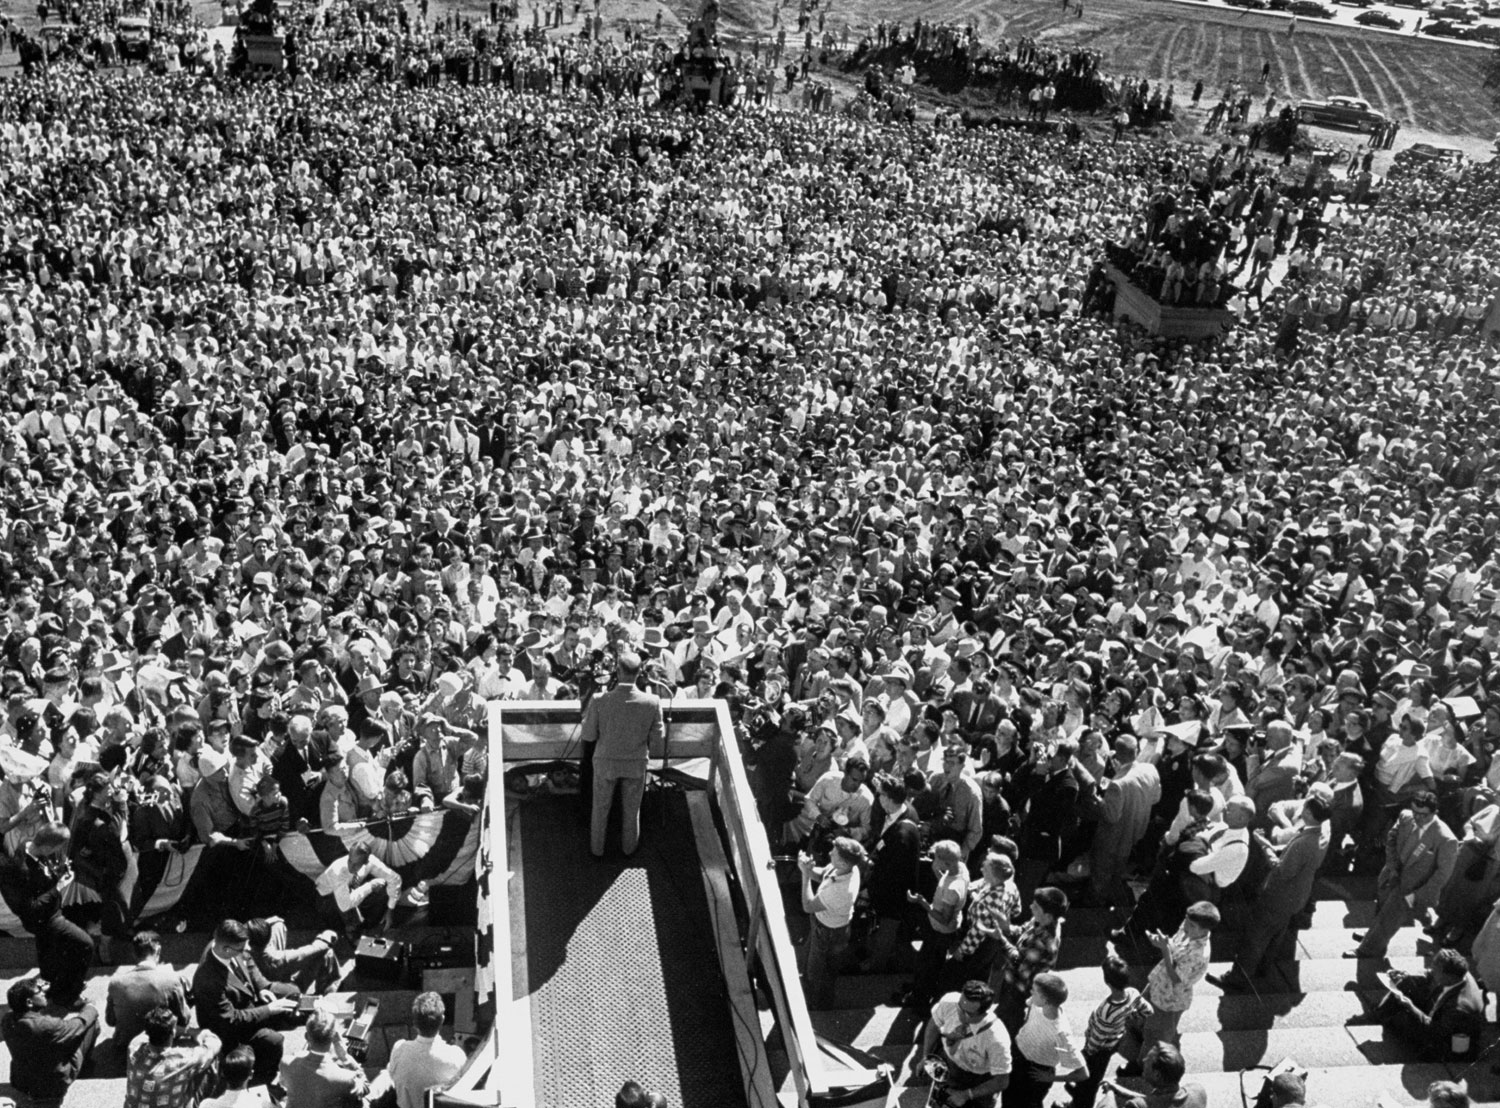 A photo from above of General Dwight D. Eisenhower standing at a lectern delivering a speech during a campaigning whistle stop tour of the mid-west in September 1952. There are hundreds of people in the crowd.